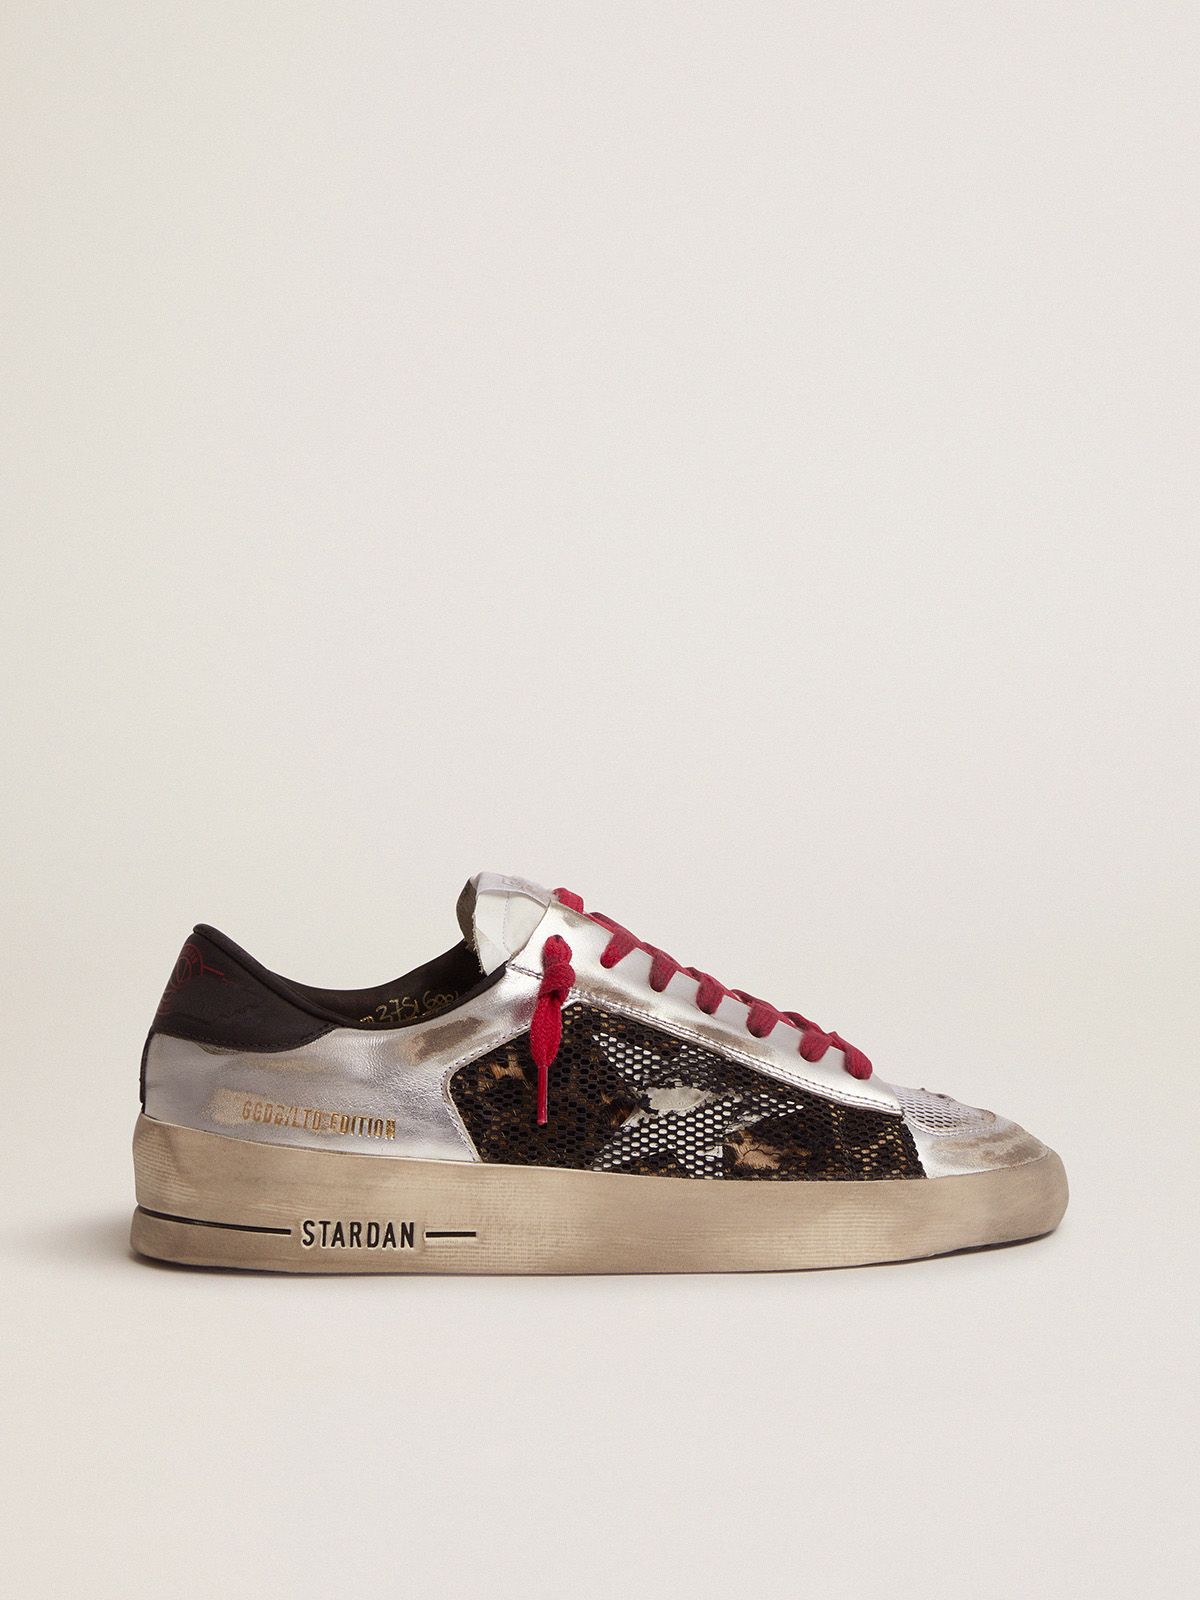 Women's Limited Edition LAB silver and animal-print Stardan sneakers